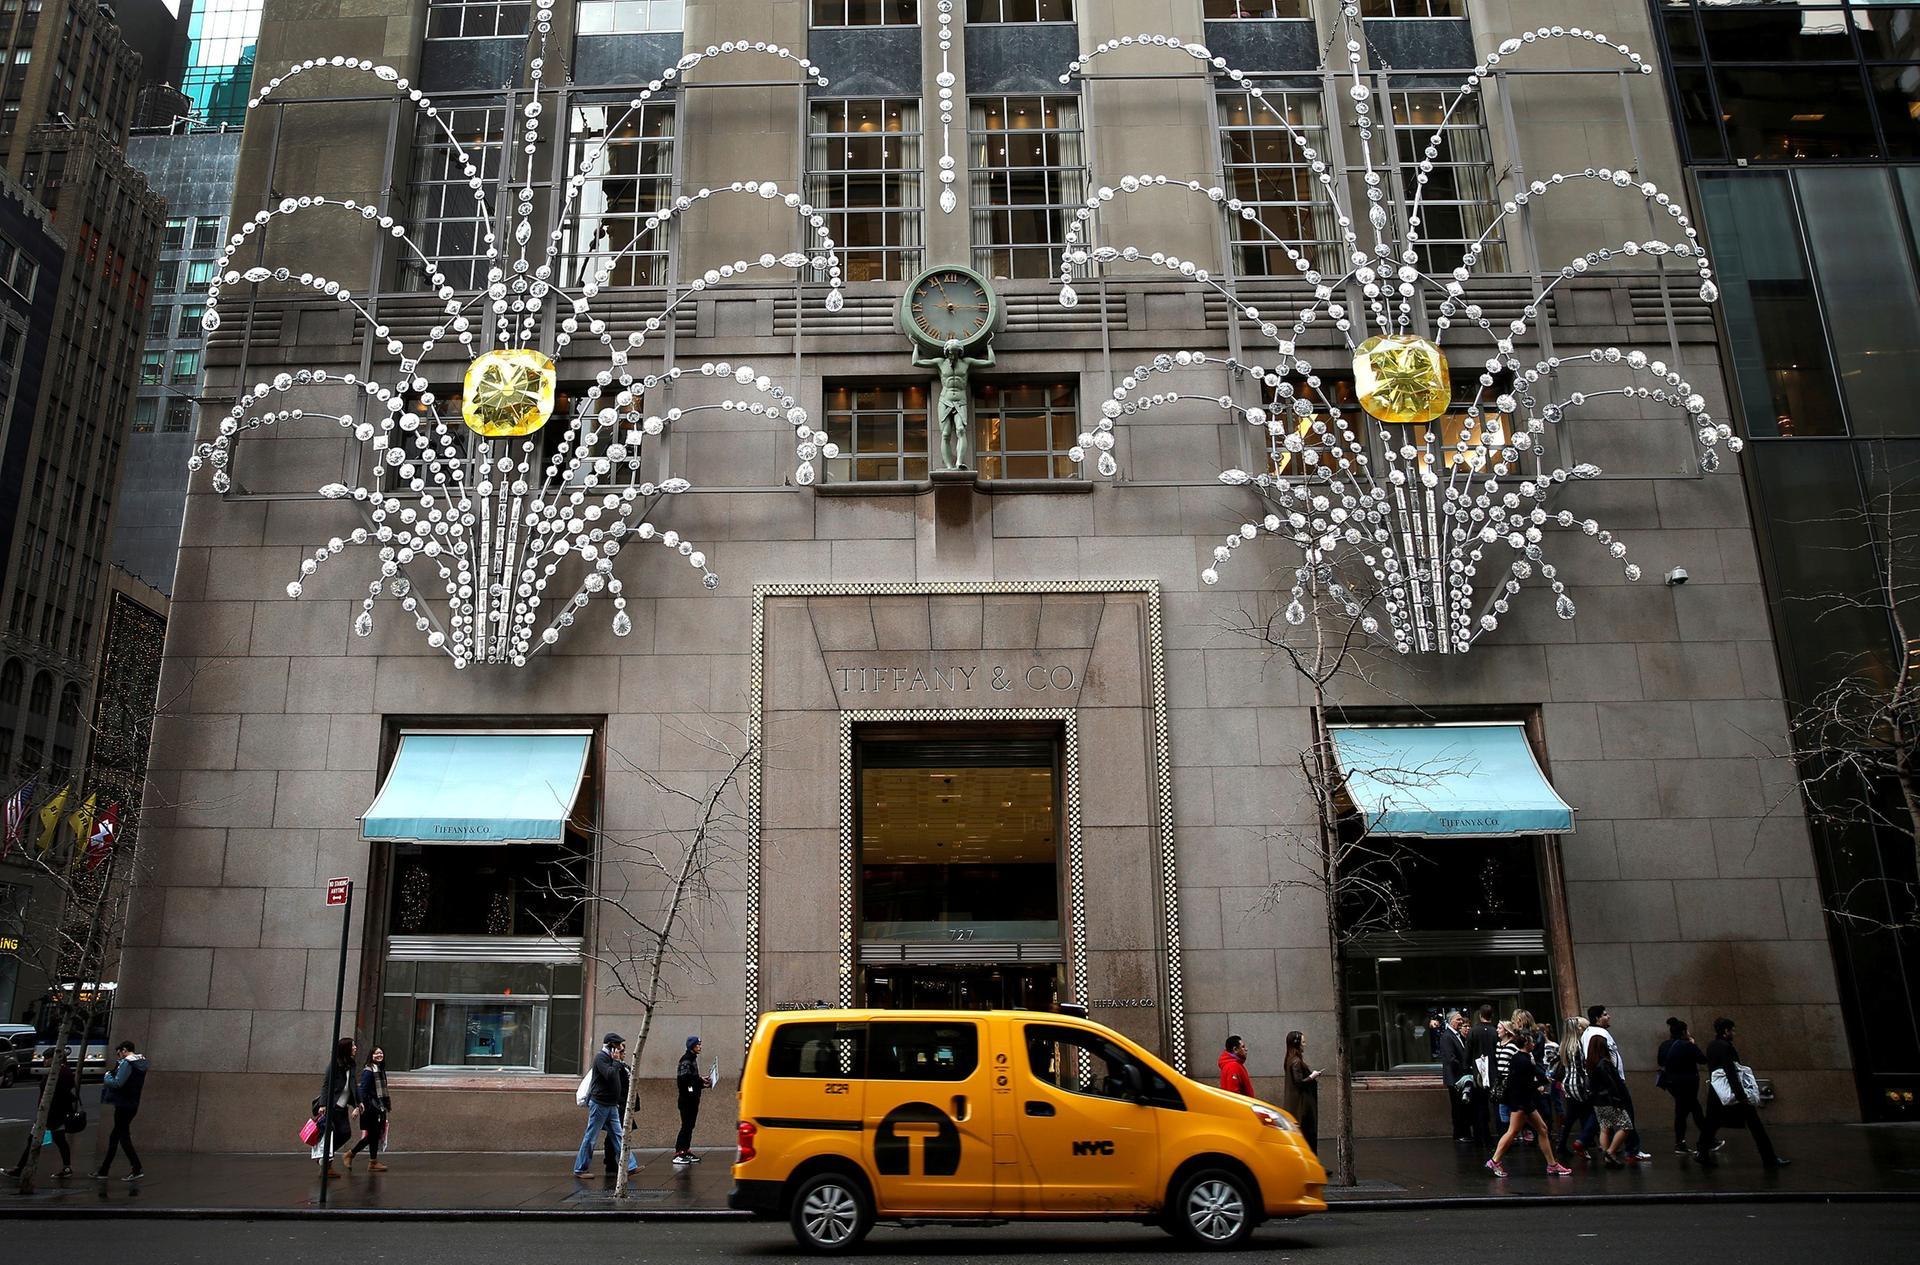 Fashion News: LVMH Tiffany's Buyout deal Stalled.